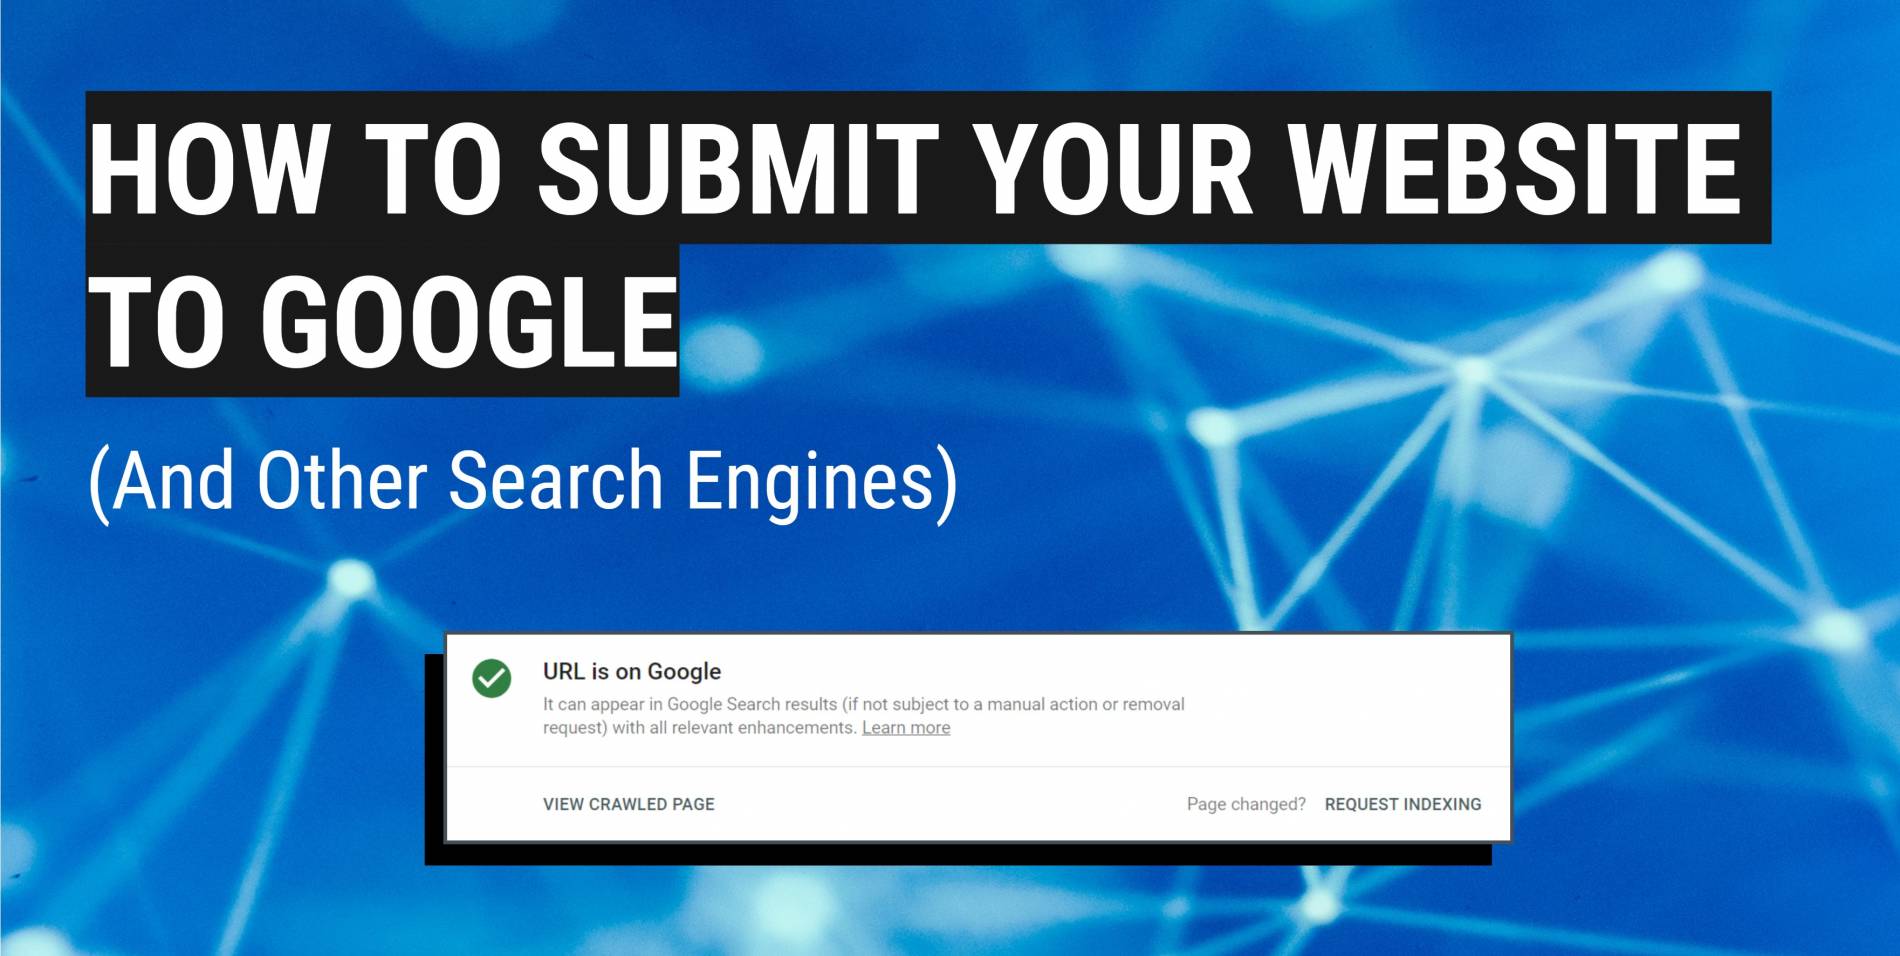 Large text "How to Submit Your Website to Google (And Other Search Engines) on top of Blue abstract digital background with a screenshot of a Google message saying "URL is on Google."